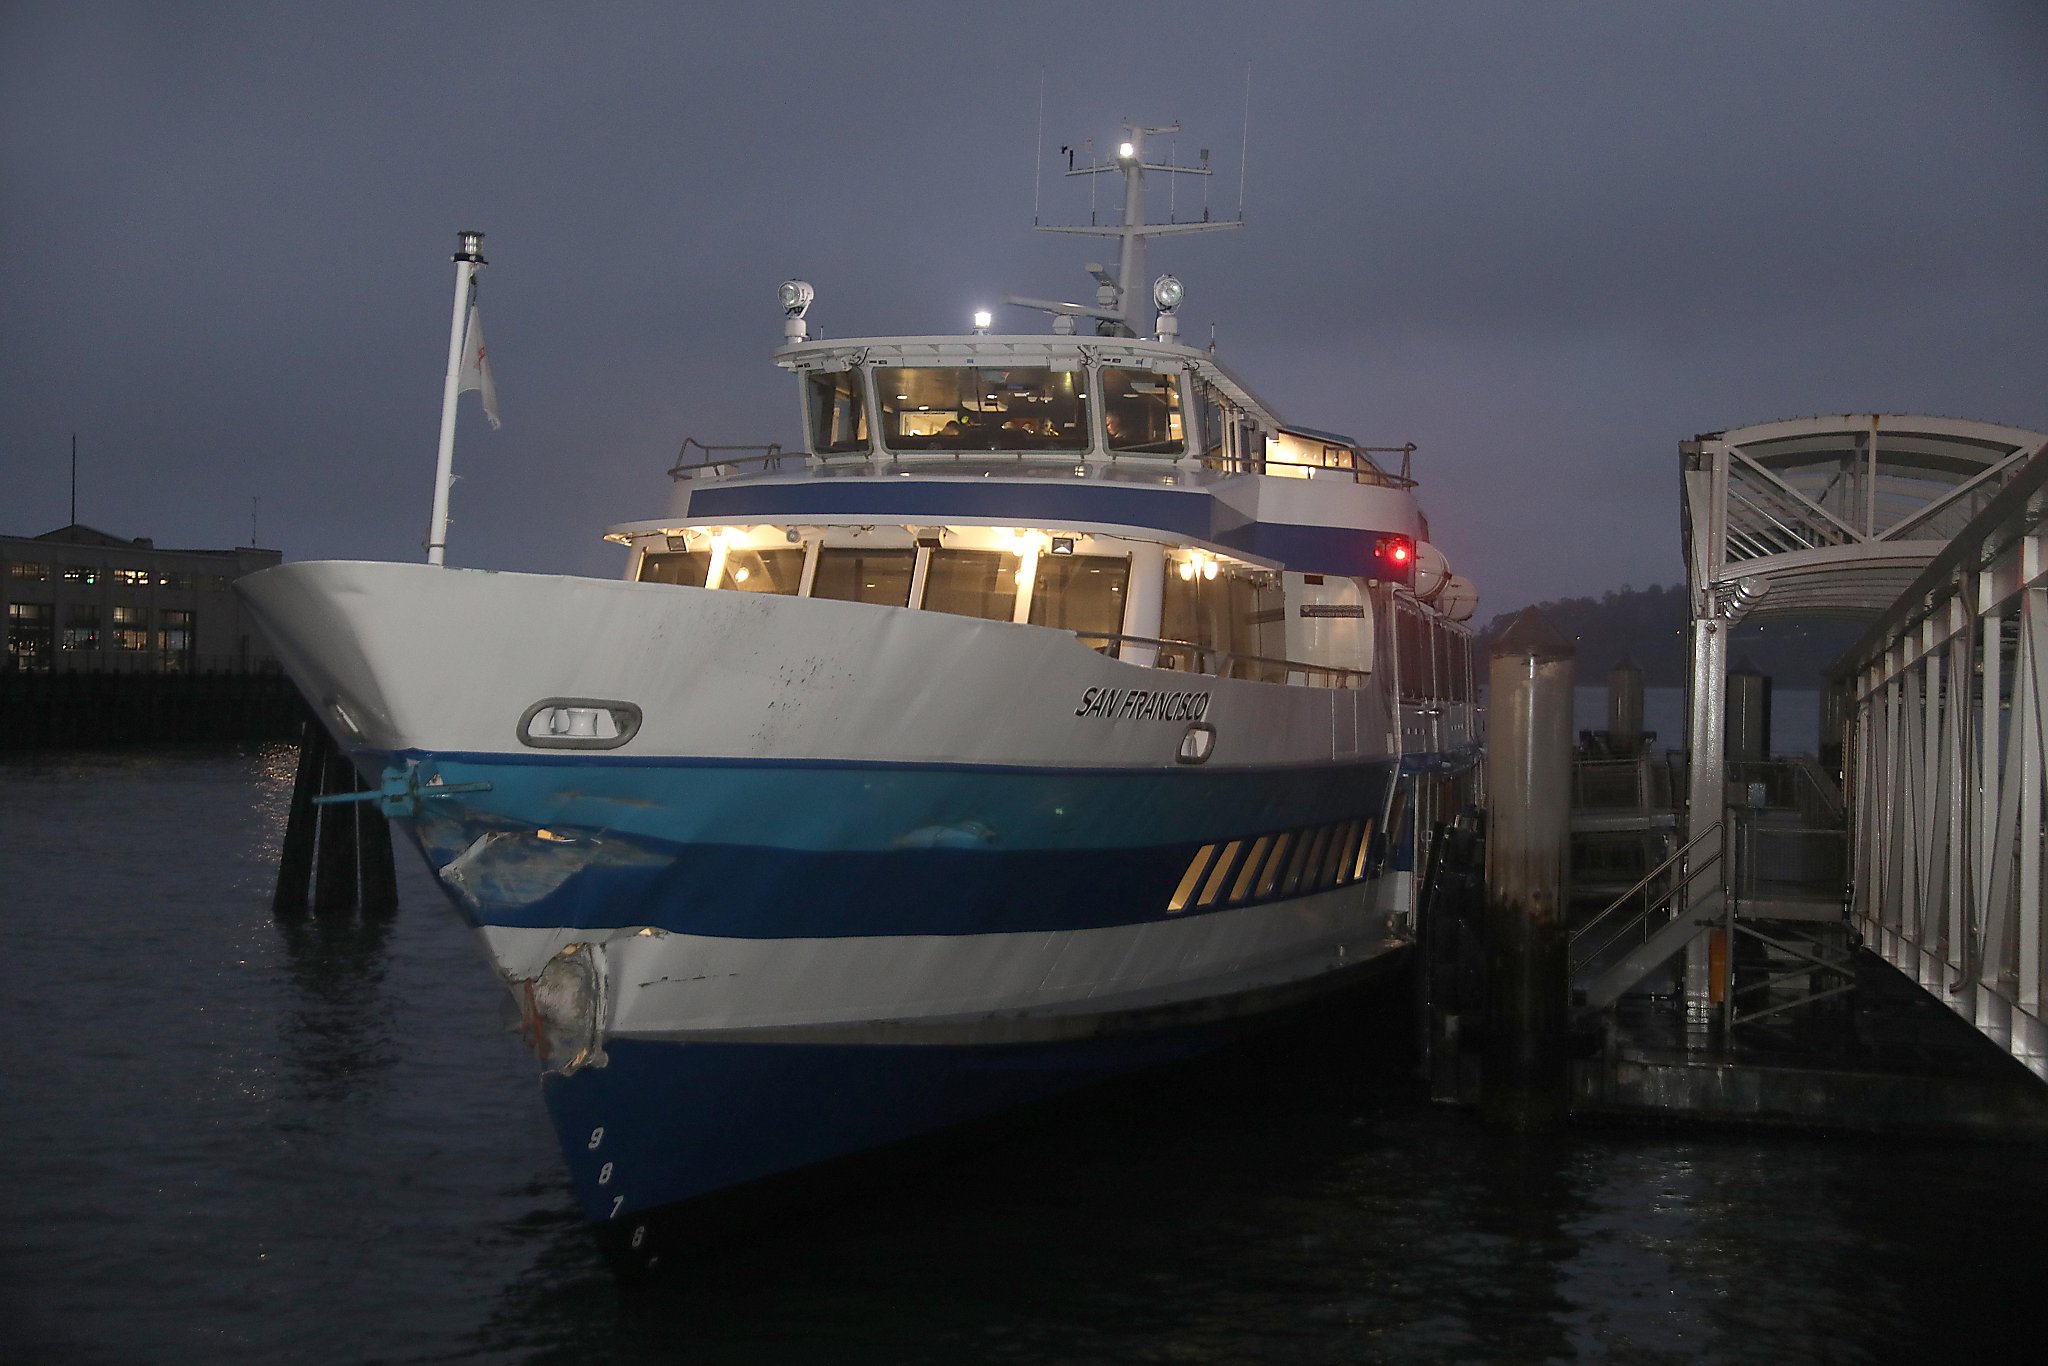 larkspur ferry slams into dock at ferry building but no injuries